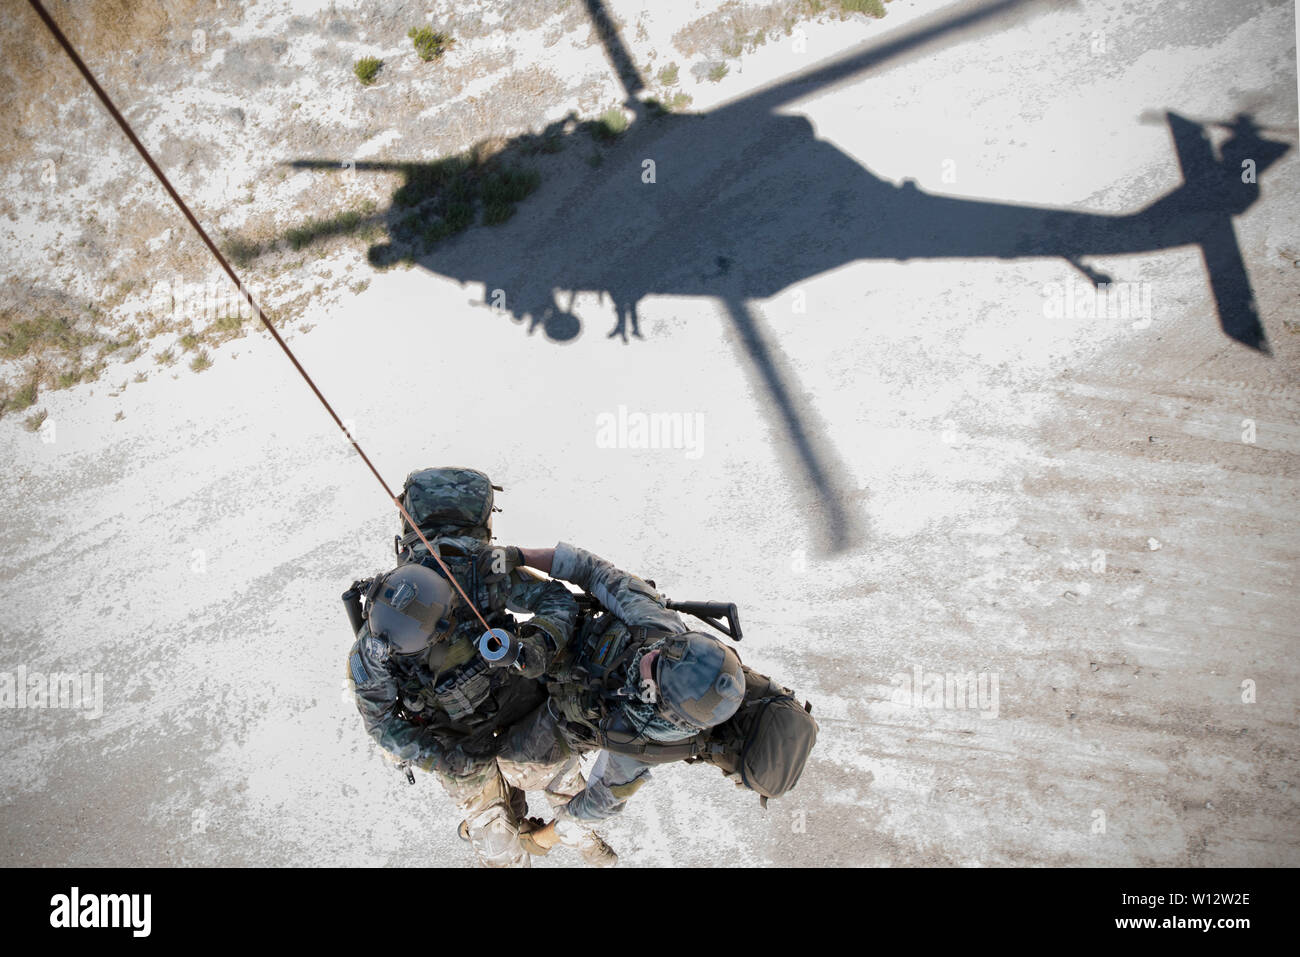 Two pararescuemen assigned to the 66th Rescue Squadron hoist themselves out of an HH-60 Pave Hawk during the Joint Civilian Orientation Conference (JCOC) 91 at Nellis Air Force Base, Nev., June 26, 2019. The JCOC was established in 1948 as a Secretary of Defense-sponsored annual outreach program during which business and community leaders experience military life, training and operations. (U.S. Air Force photo by Airman 1st Class Jeremy Wentworth) Stock Photo